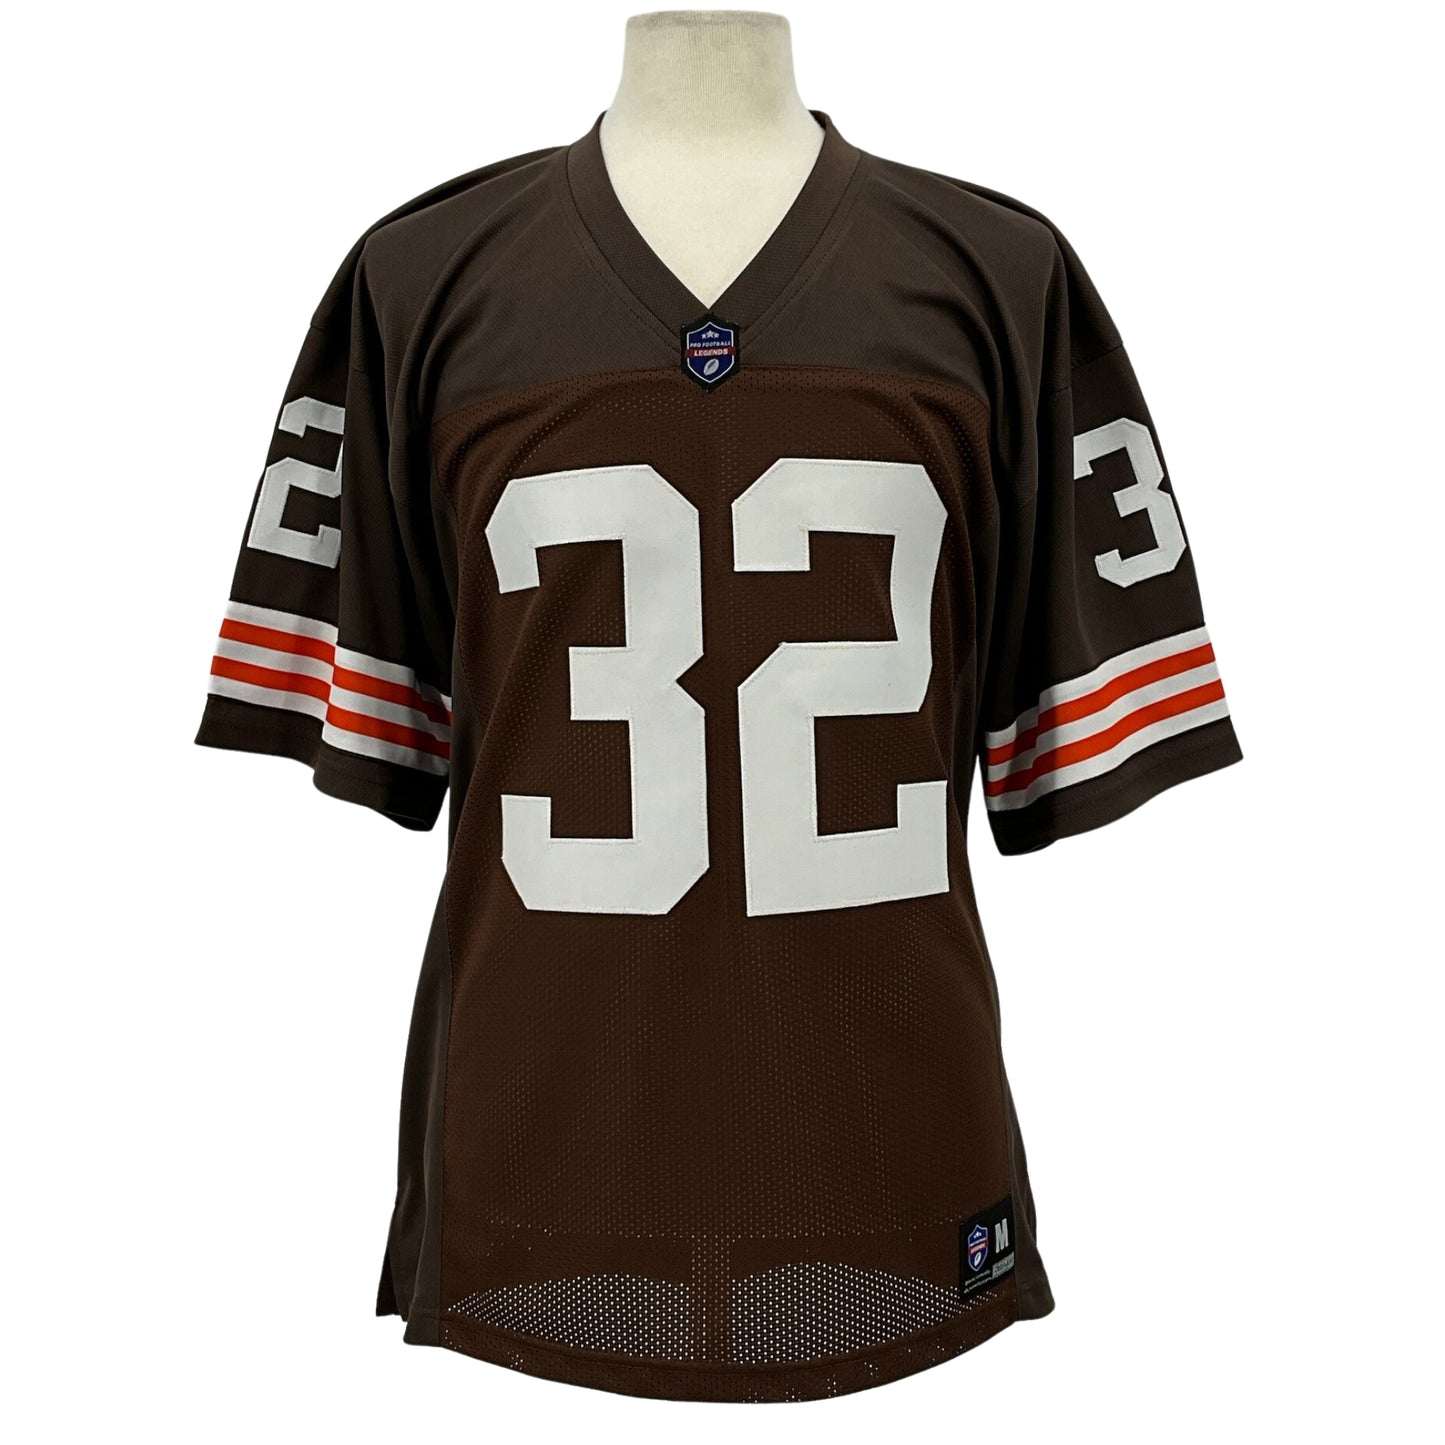 Jim Brown 2-Tone Color (see image 4) Brown Jersey Cleveland | M-5XL Custom Stitch